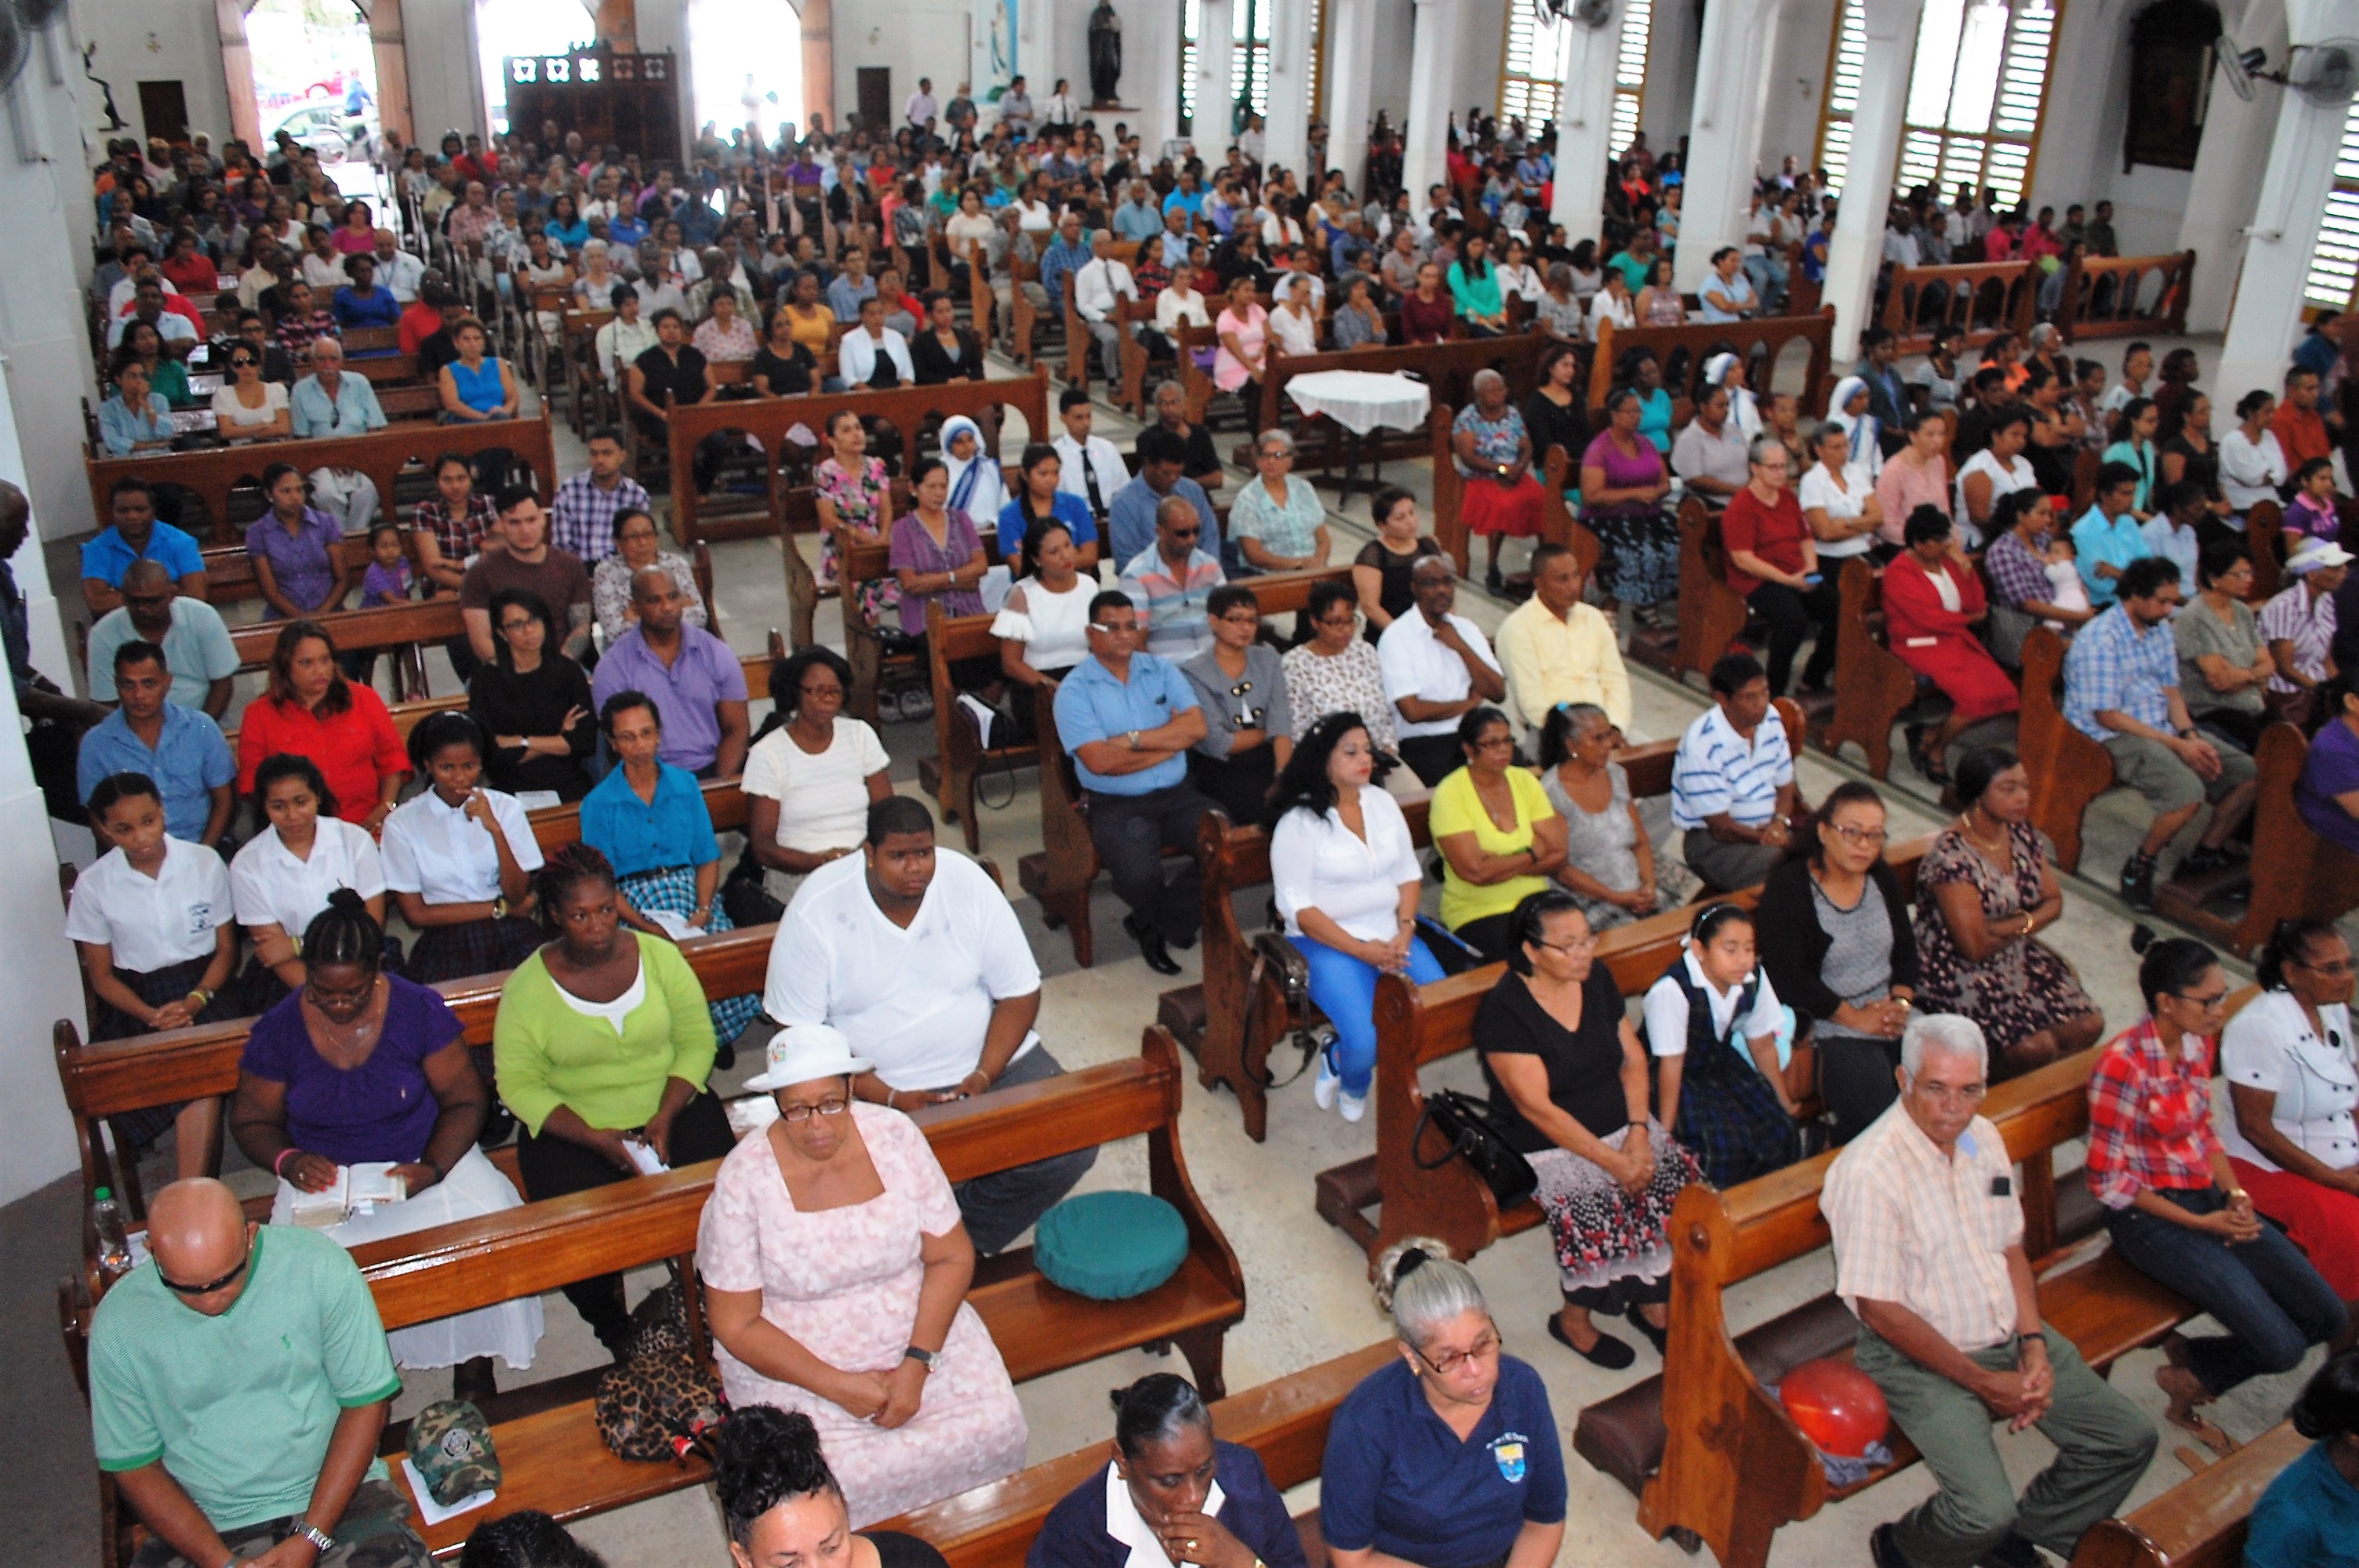 Christians brave the weather to observe Ash Wednesday | INews Guyana